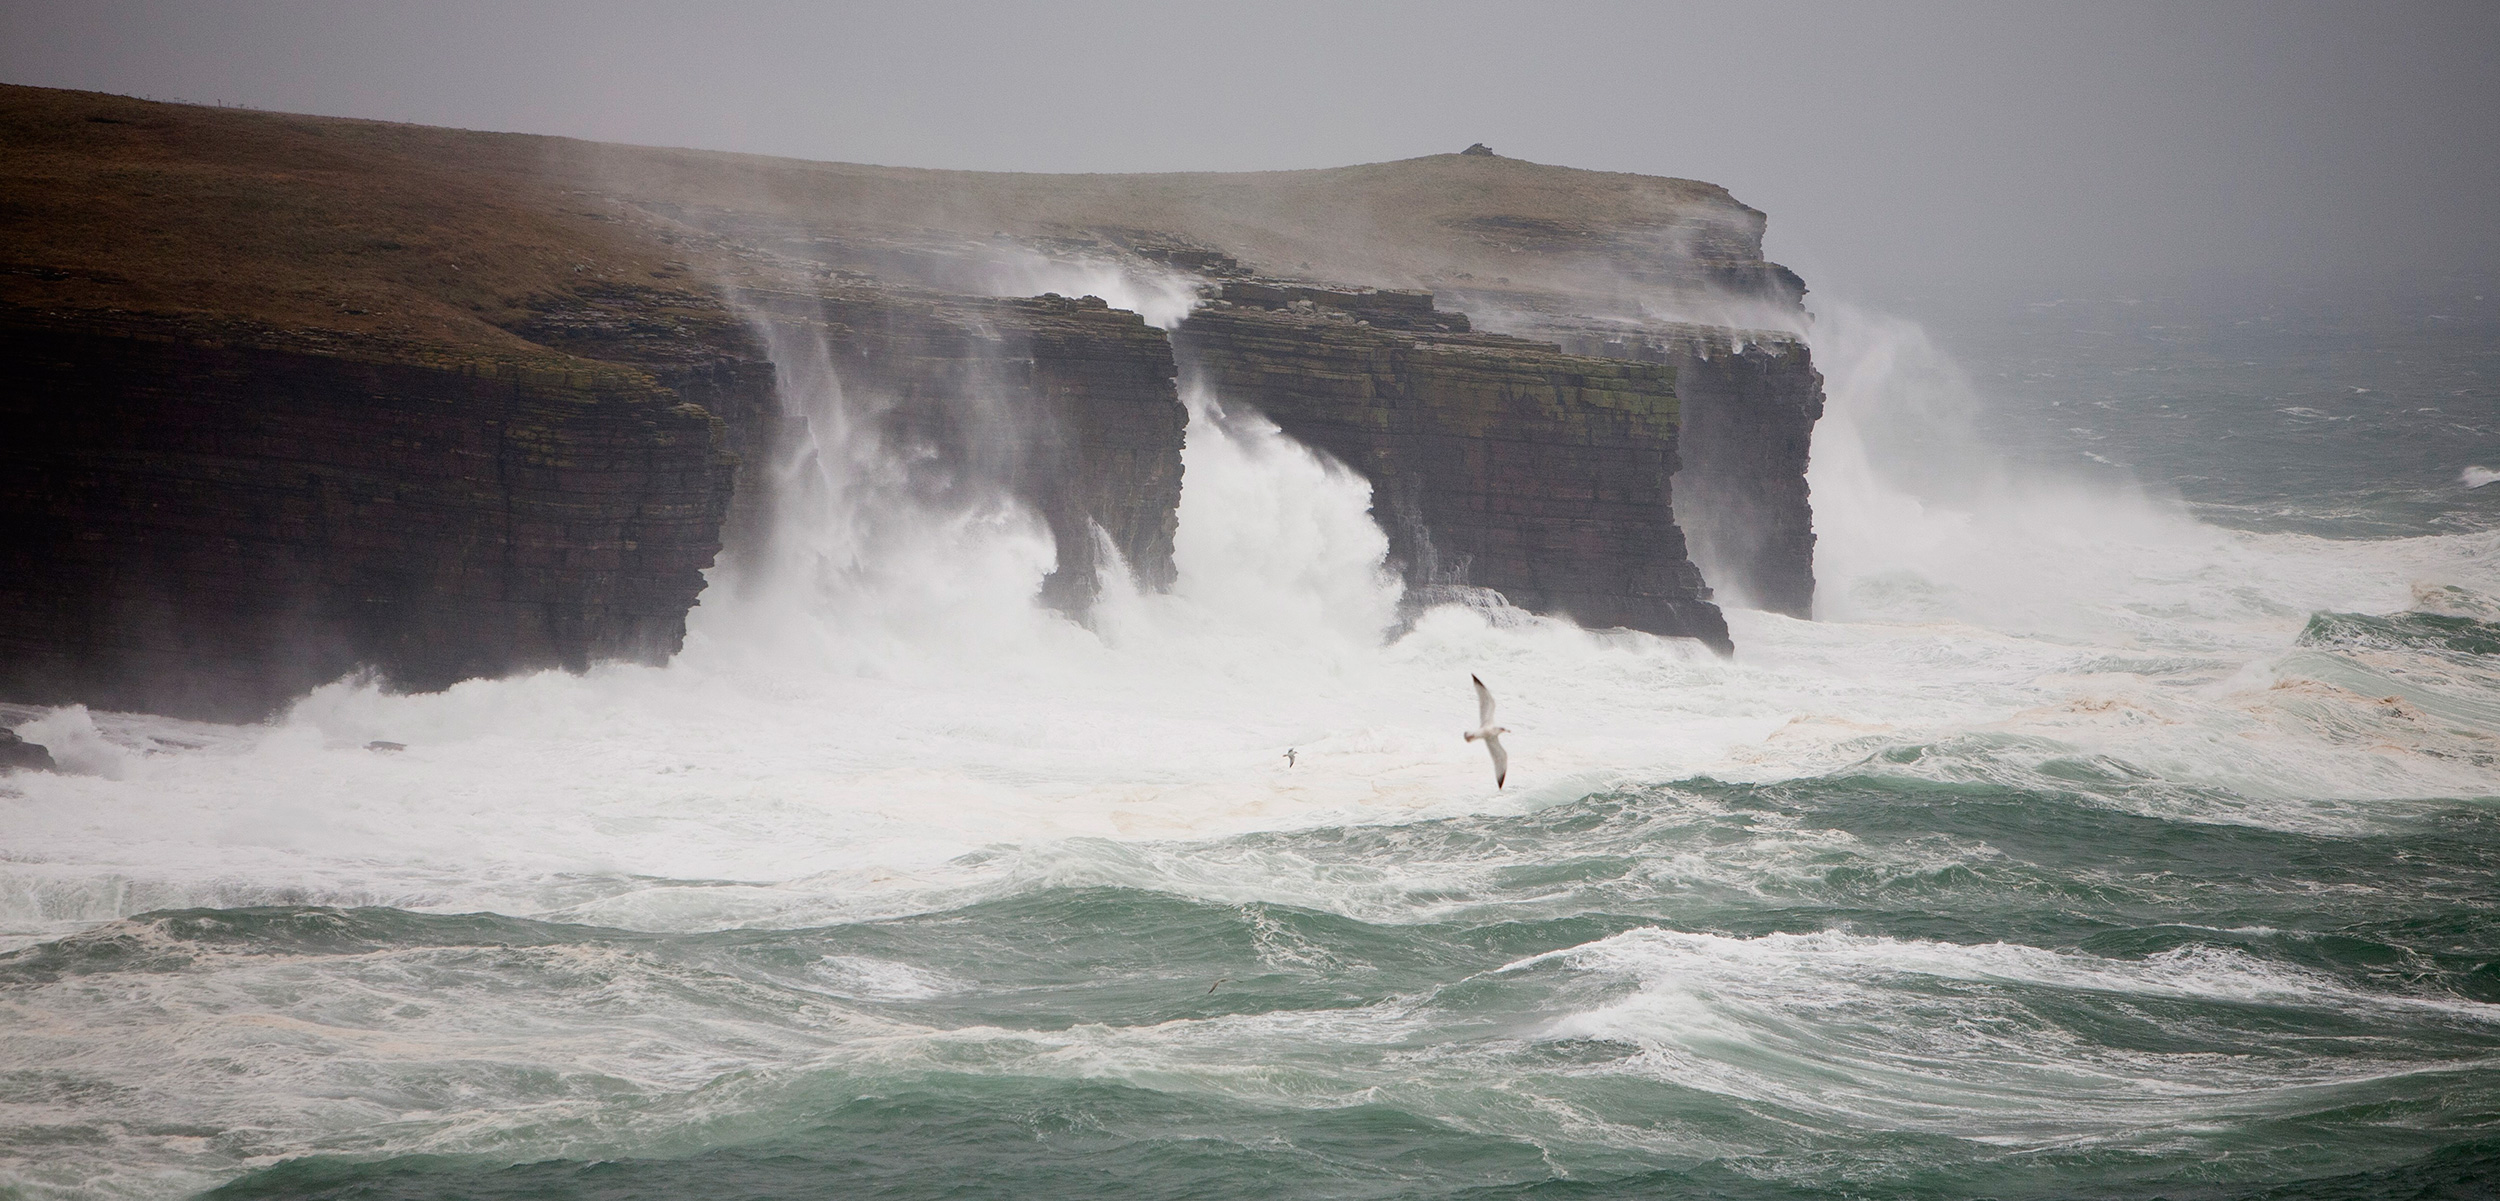 Severe storms threaten coastal archaeological sites in Scotland’s Orkney Islands and elsewhere in the world. Photo by Ashley Cooper/Corbis